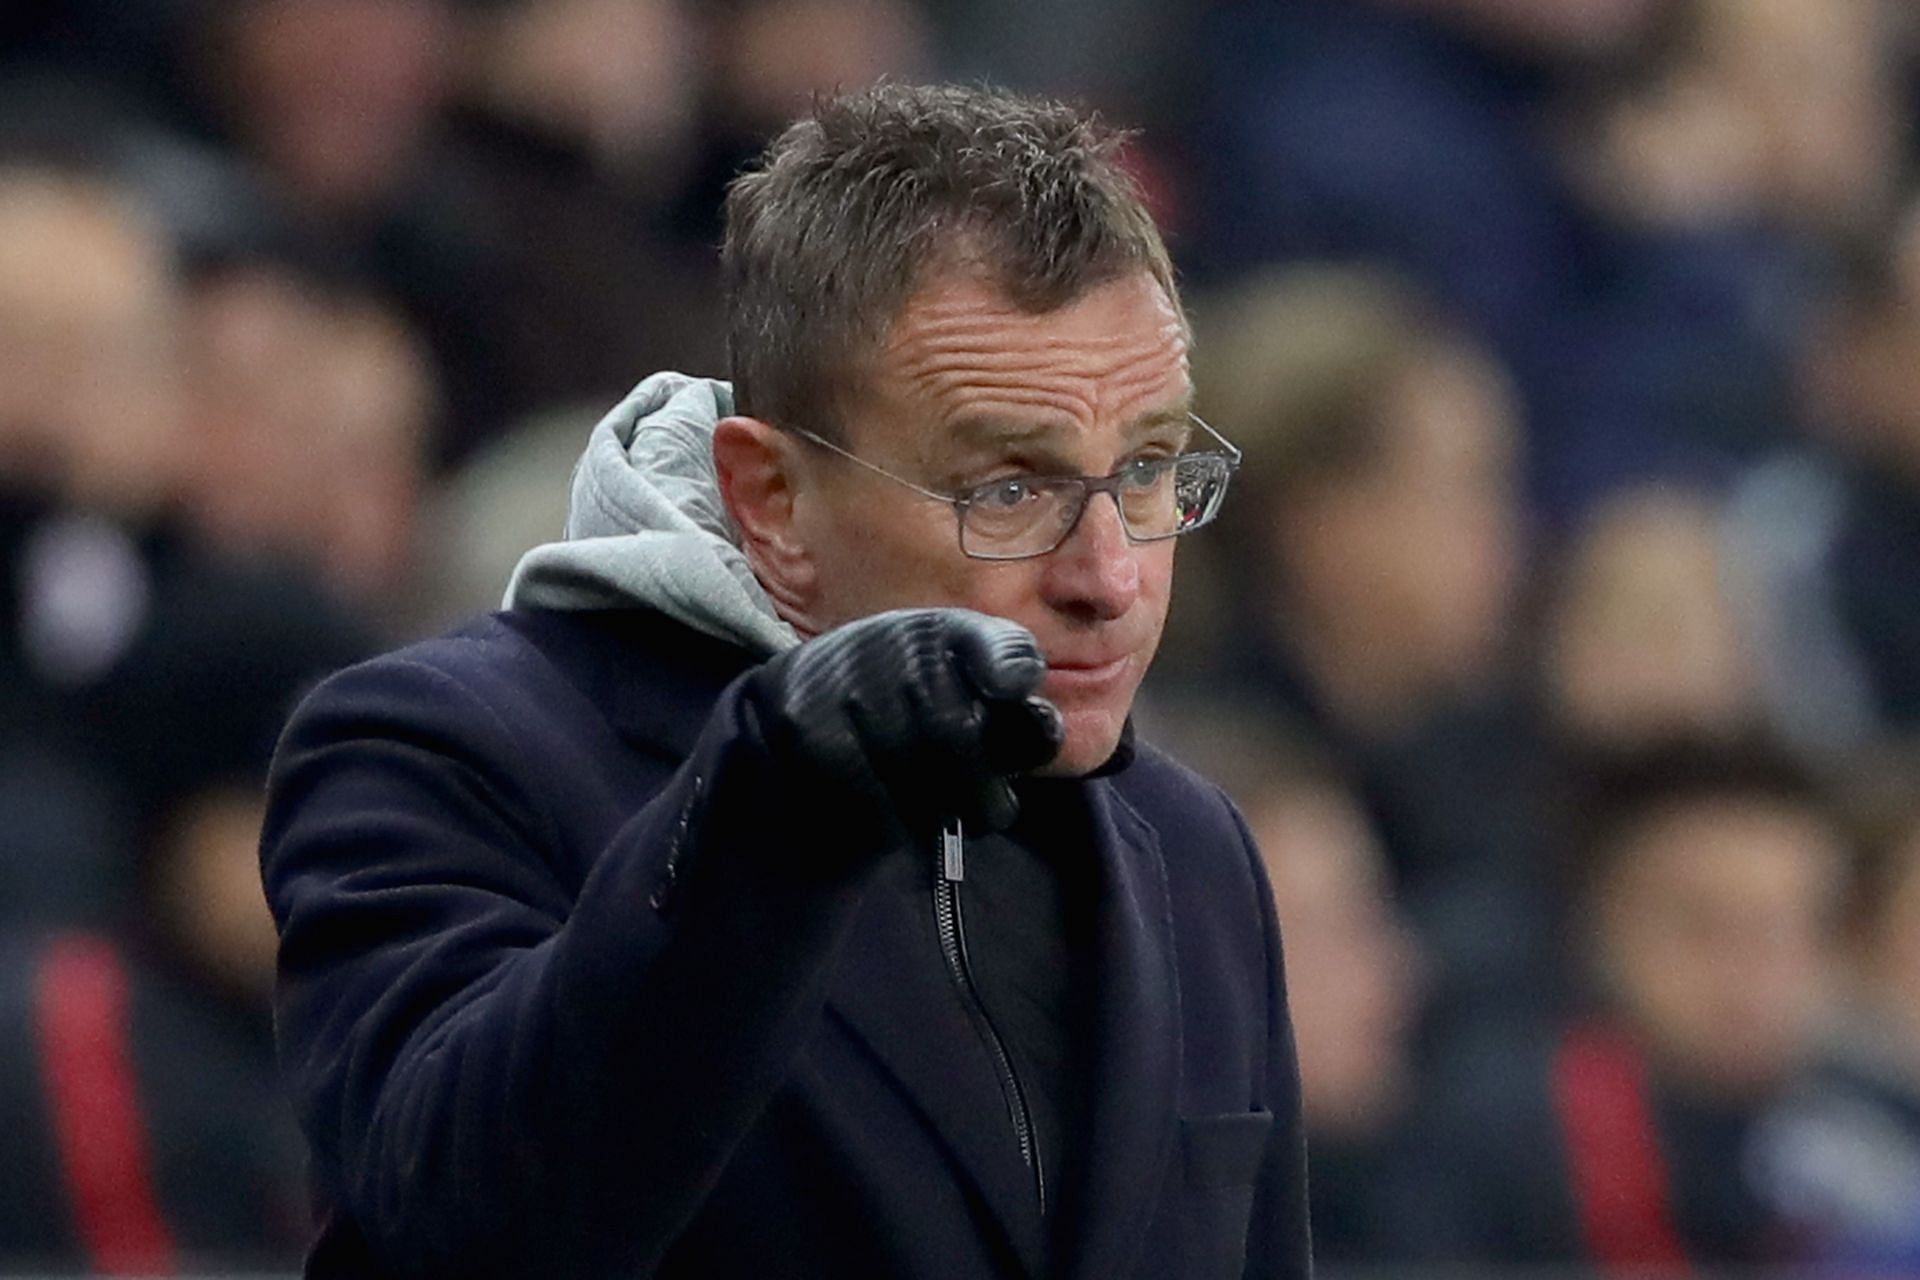 Manchester United interim manager Ralf Rangnick. (Photo by Alexander Hassenstein/Getty Images)